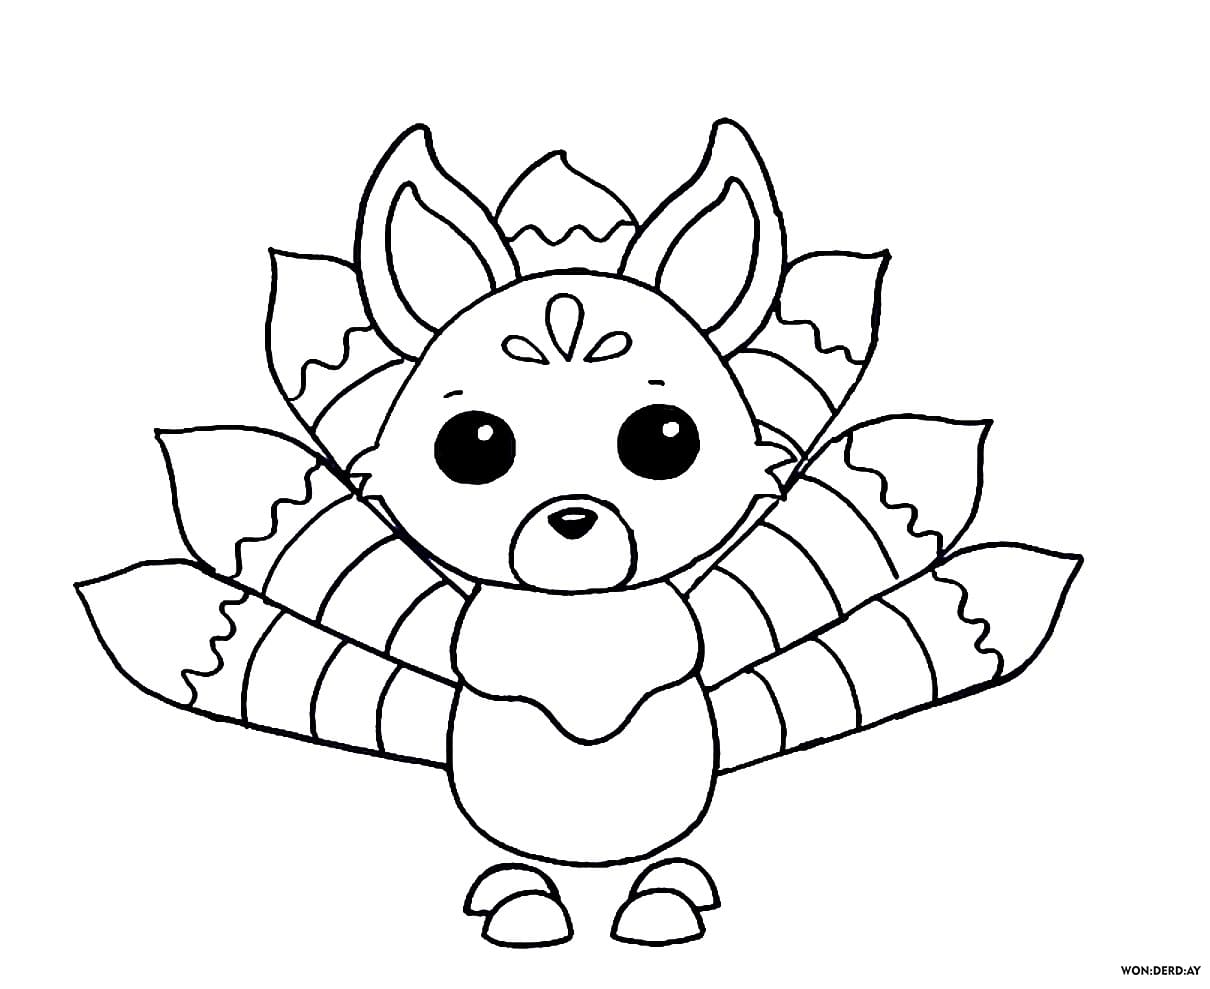 Adopt Me Coloring Pages   Coloring Home